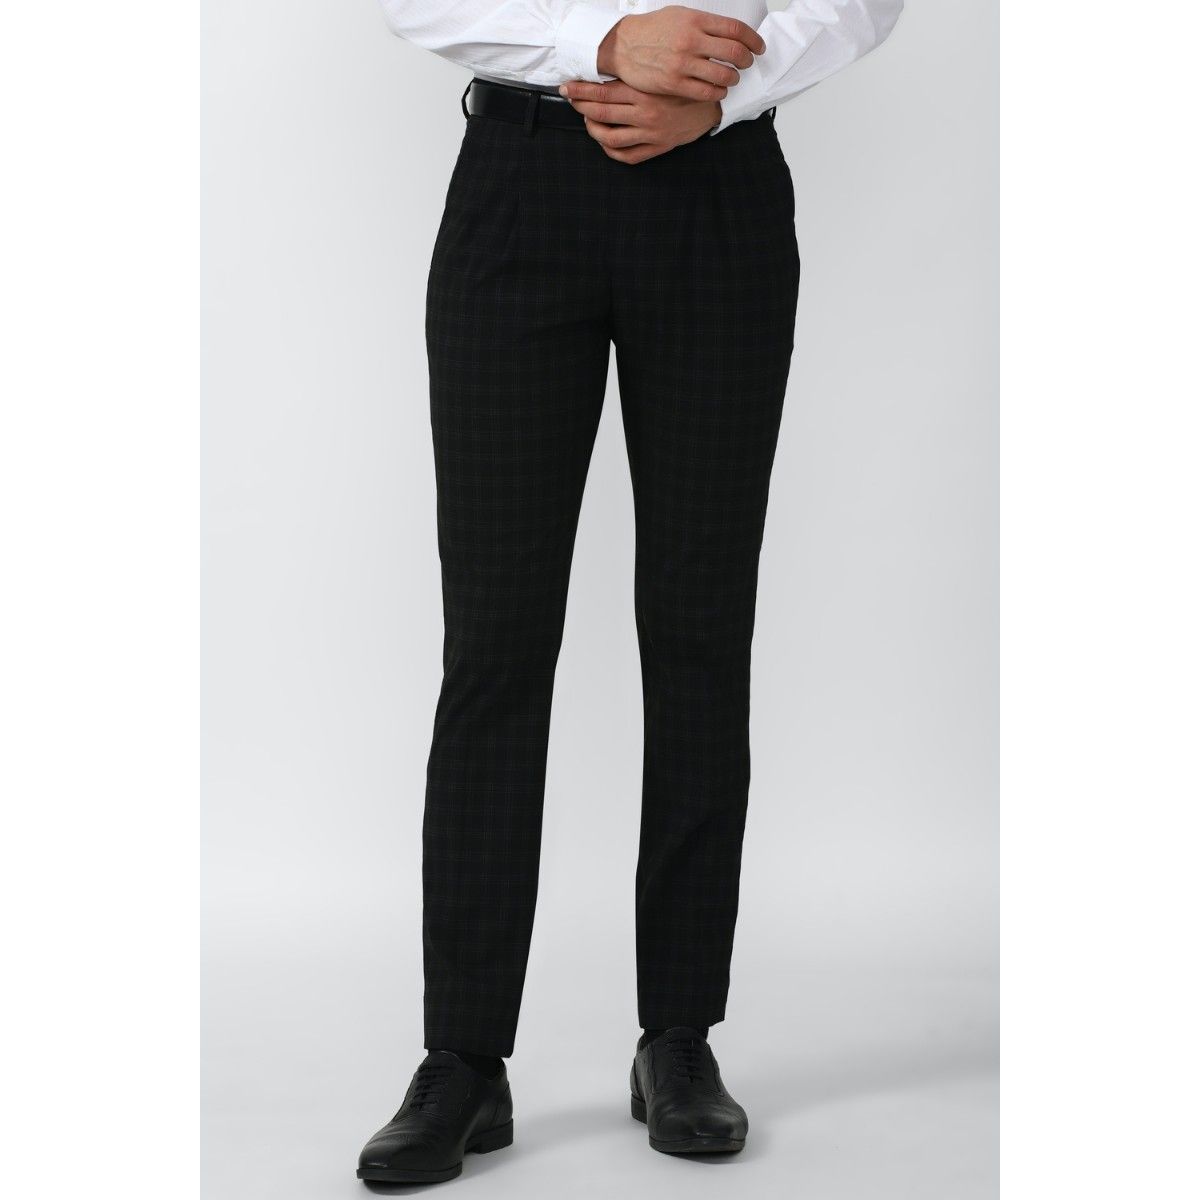 Jeans & Pants | Peter England Trousers For Men | Freeup